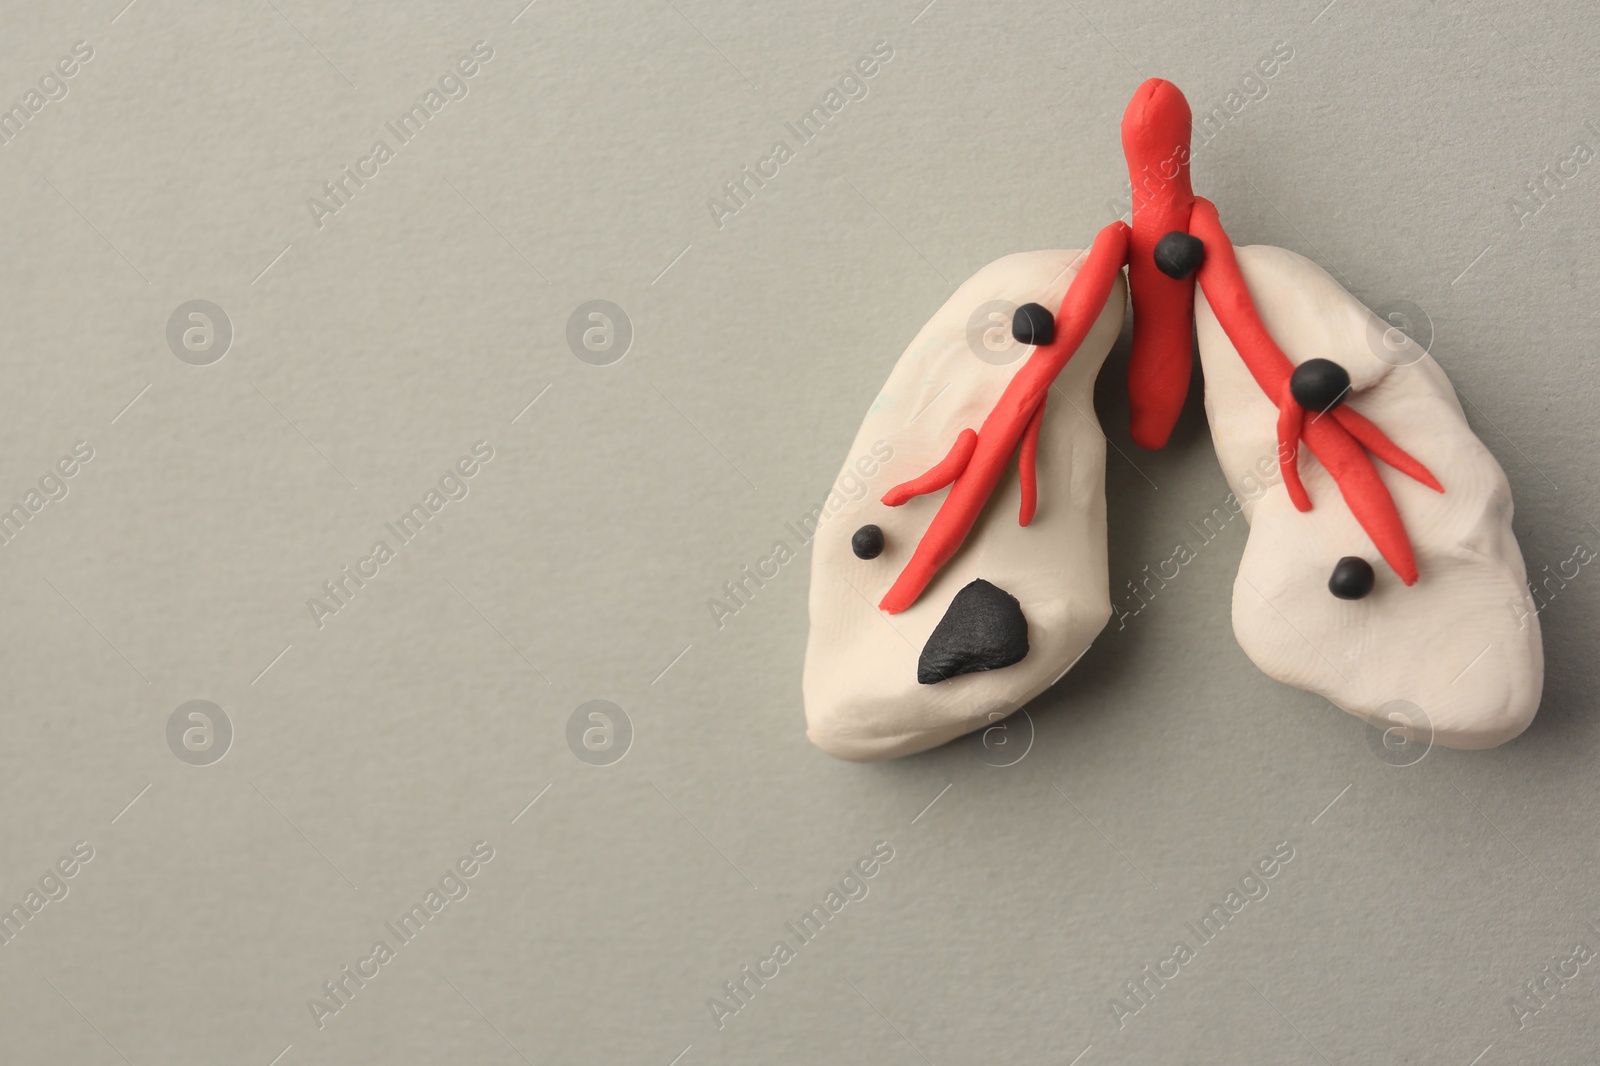 Photo of Human lungs made of plasticine on light grey background, top view and space for text. Respiratory disease concept